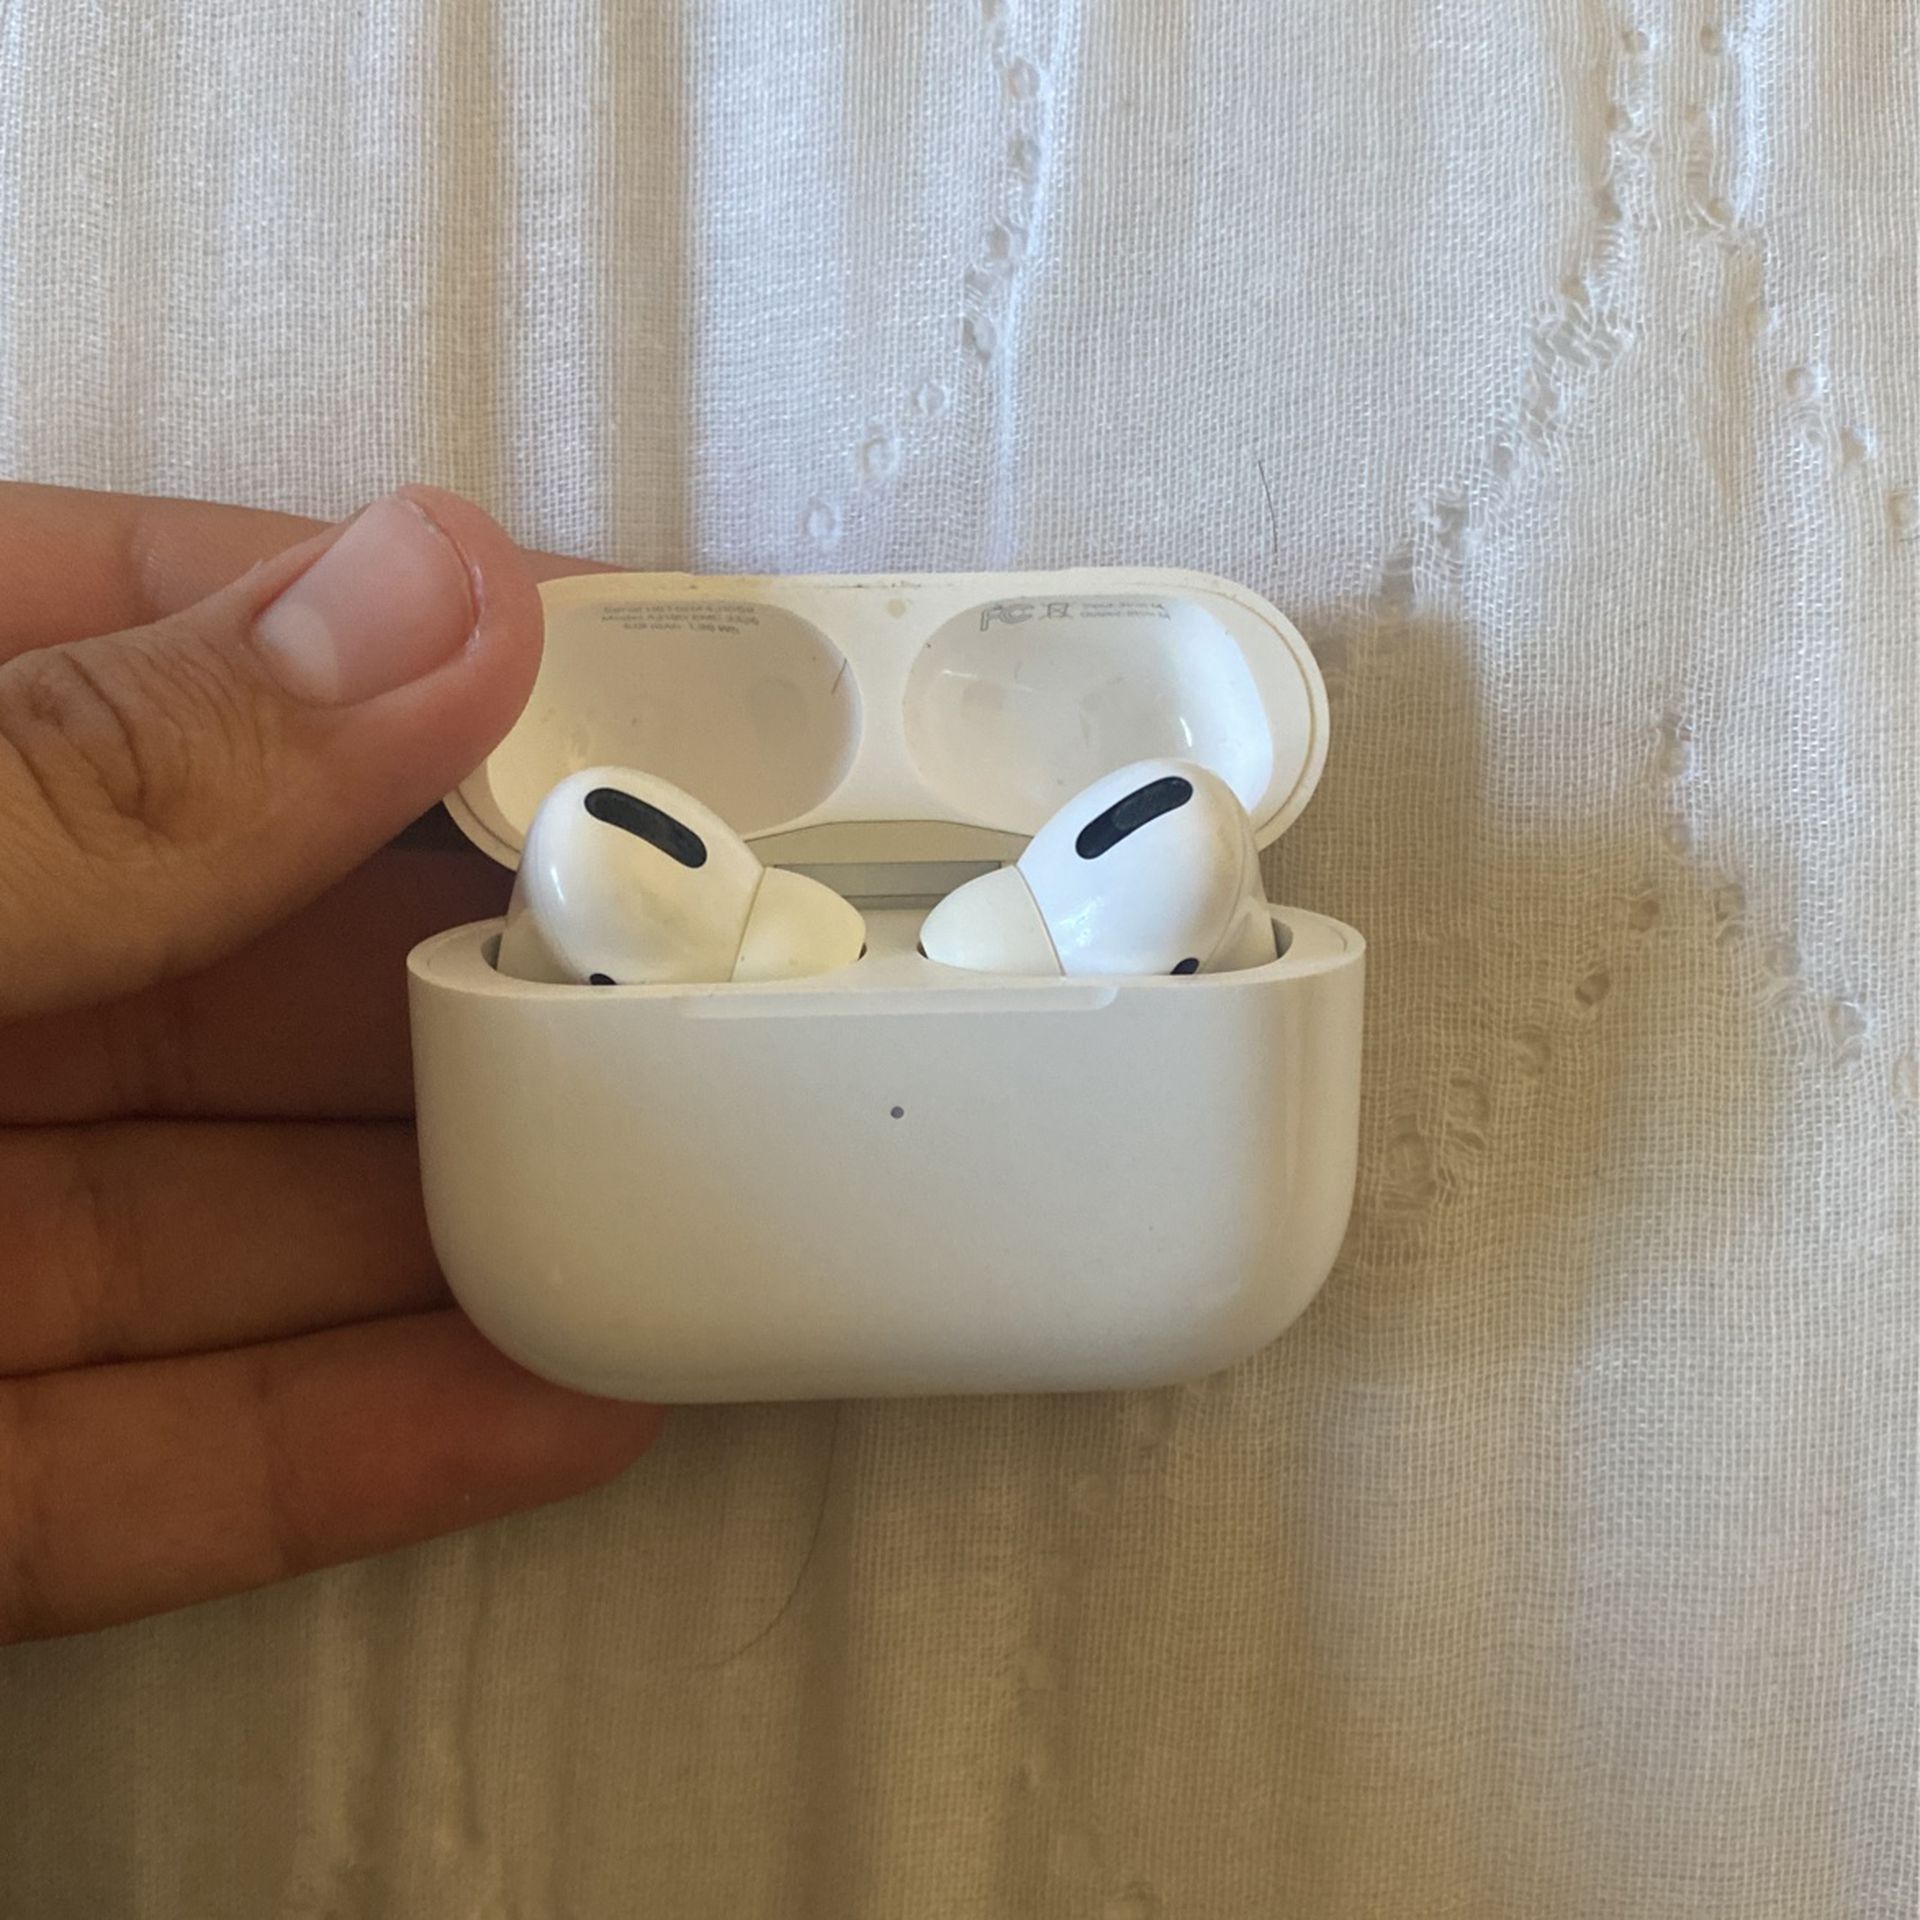 Airpods Pro Only One Works 